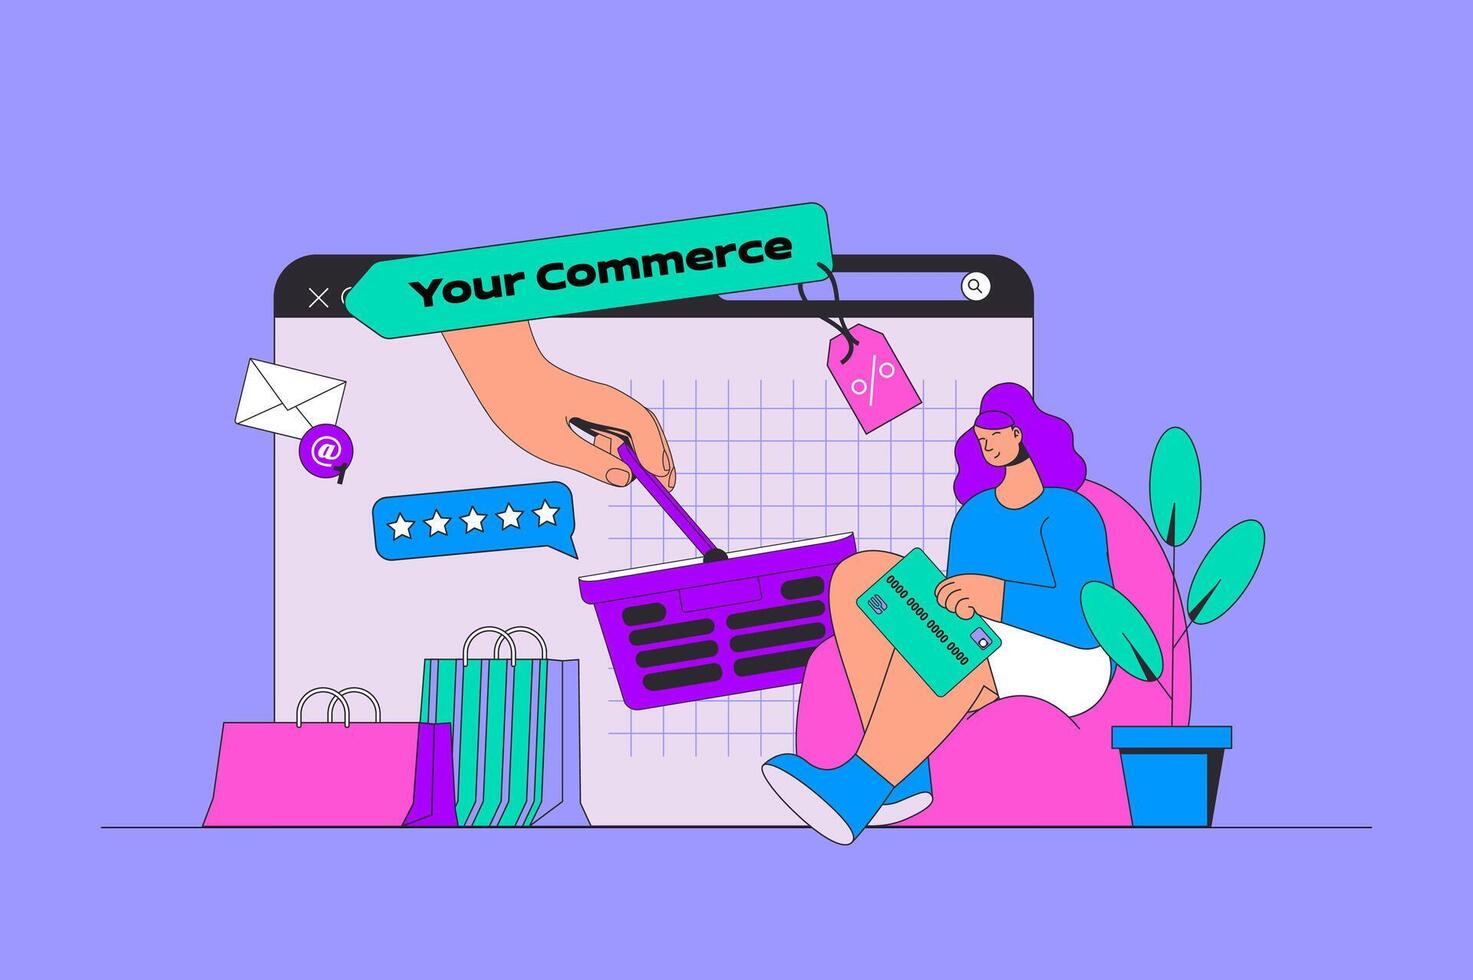 Online commerce concept in modern flat design for web. Woman making purchase orders at store site, paying with credit card at internet. illustration for social media banner, marketing material. vector